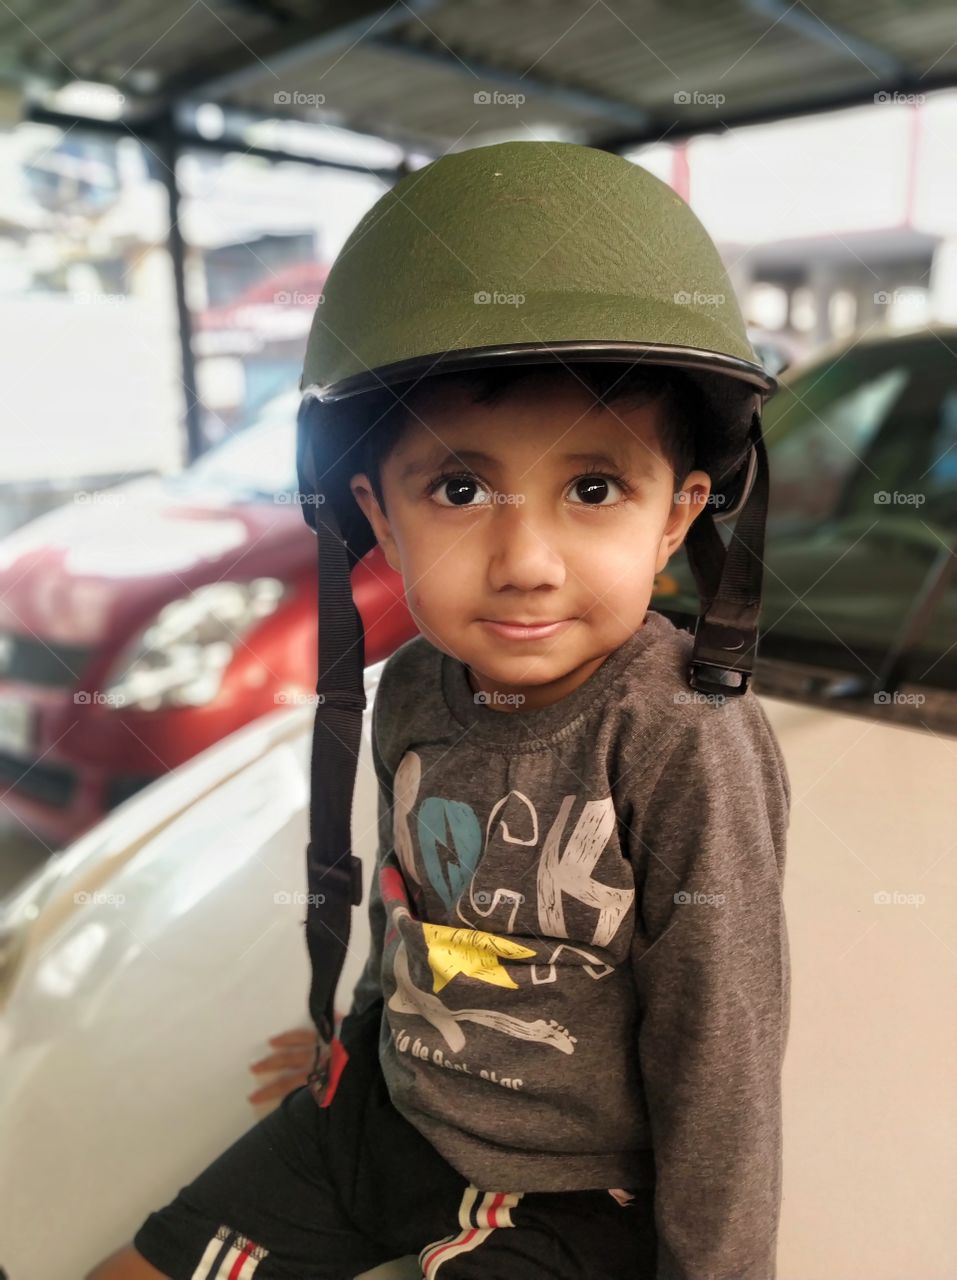 Kid is getting ready for a terrain ride in India 2018.